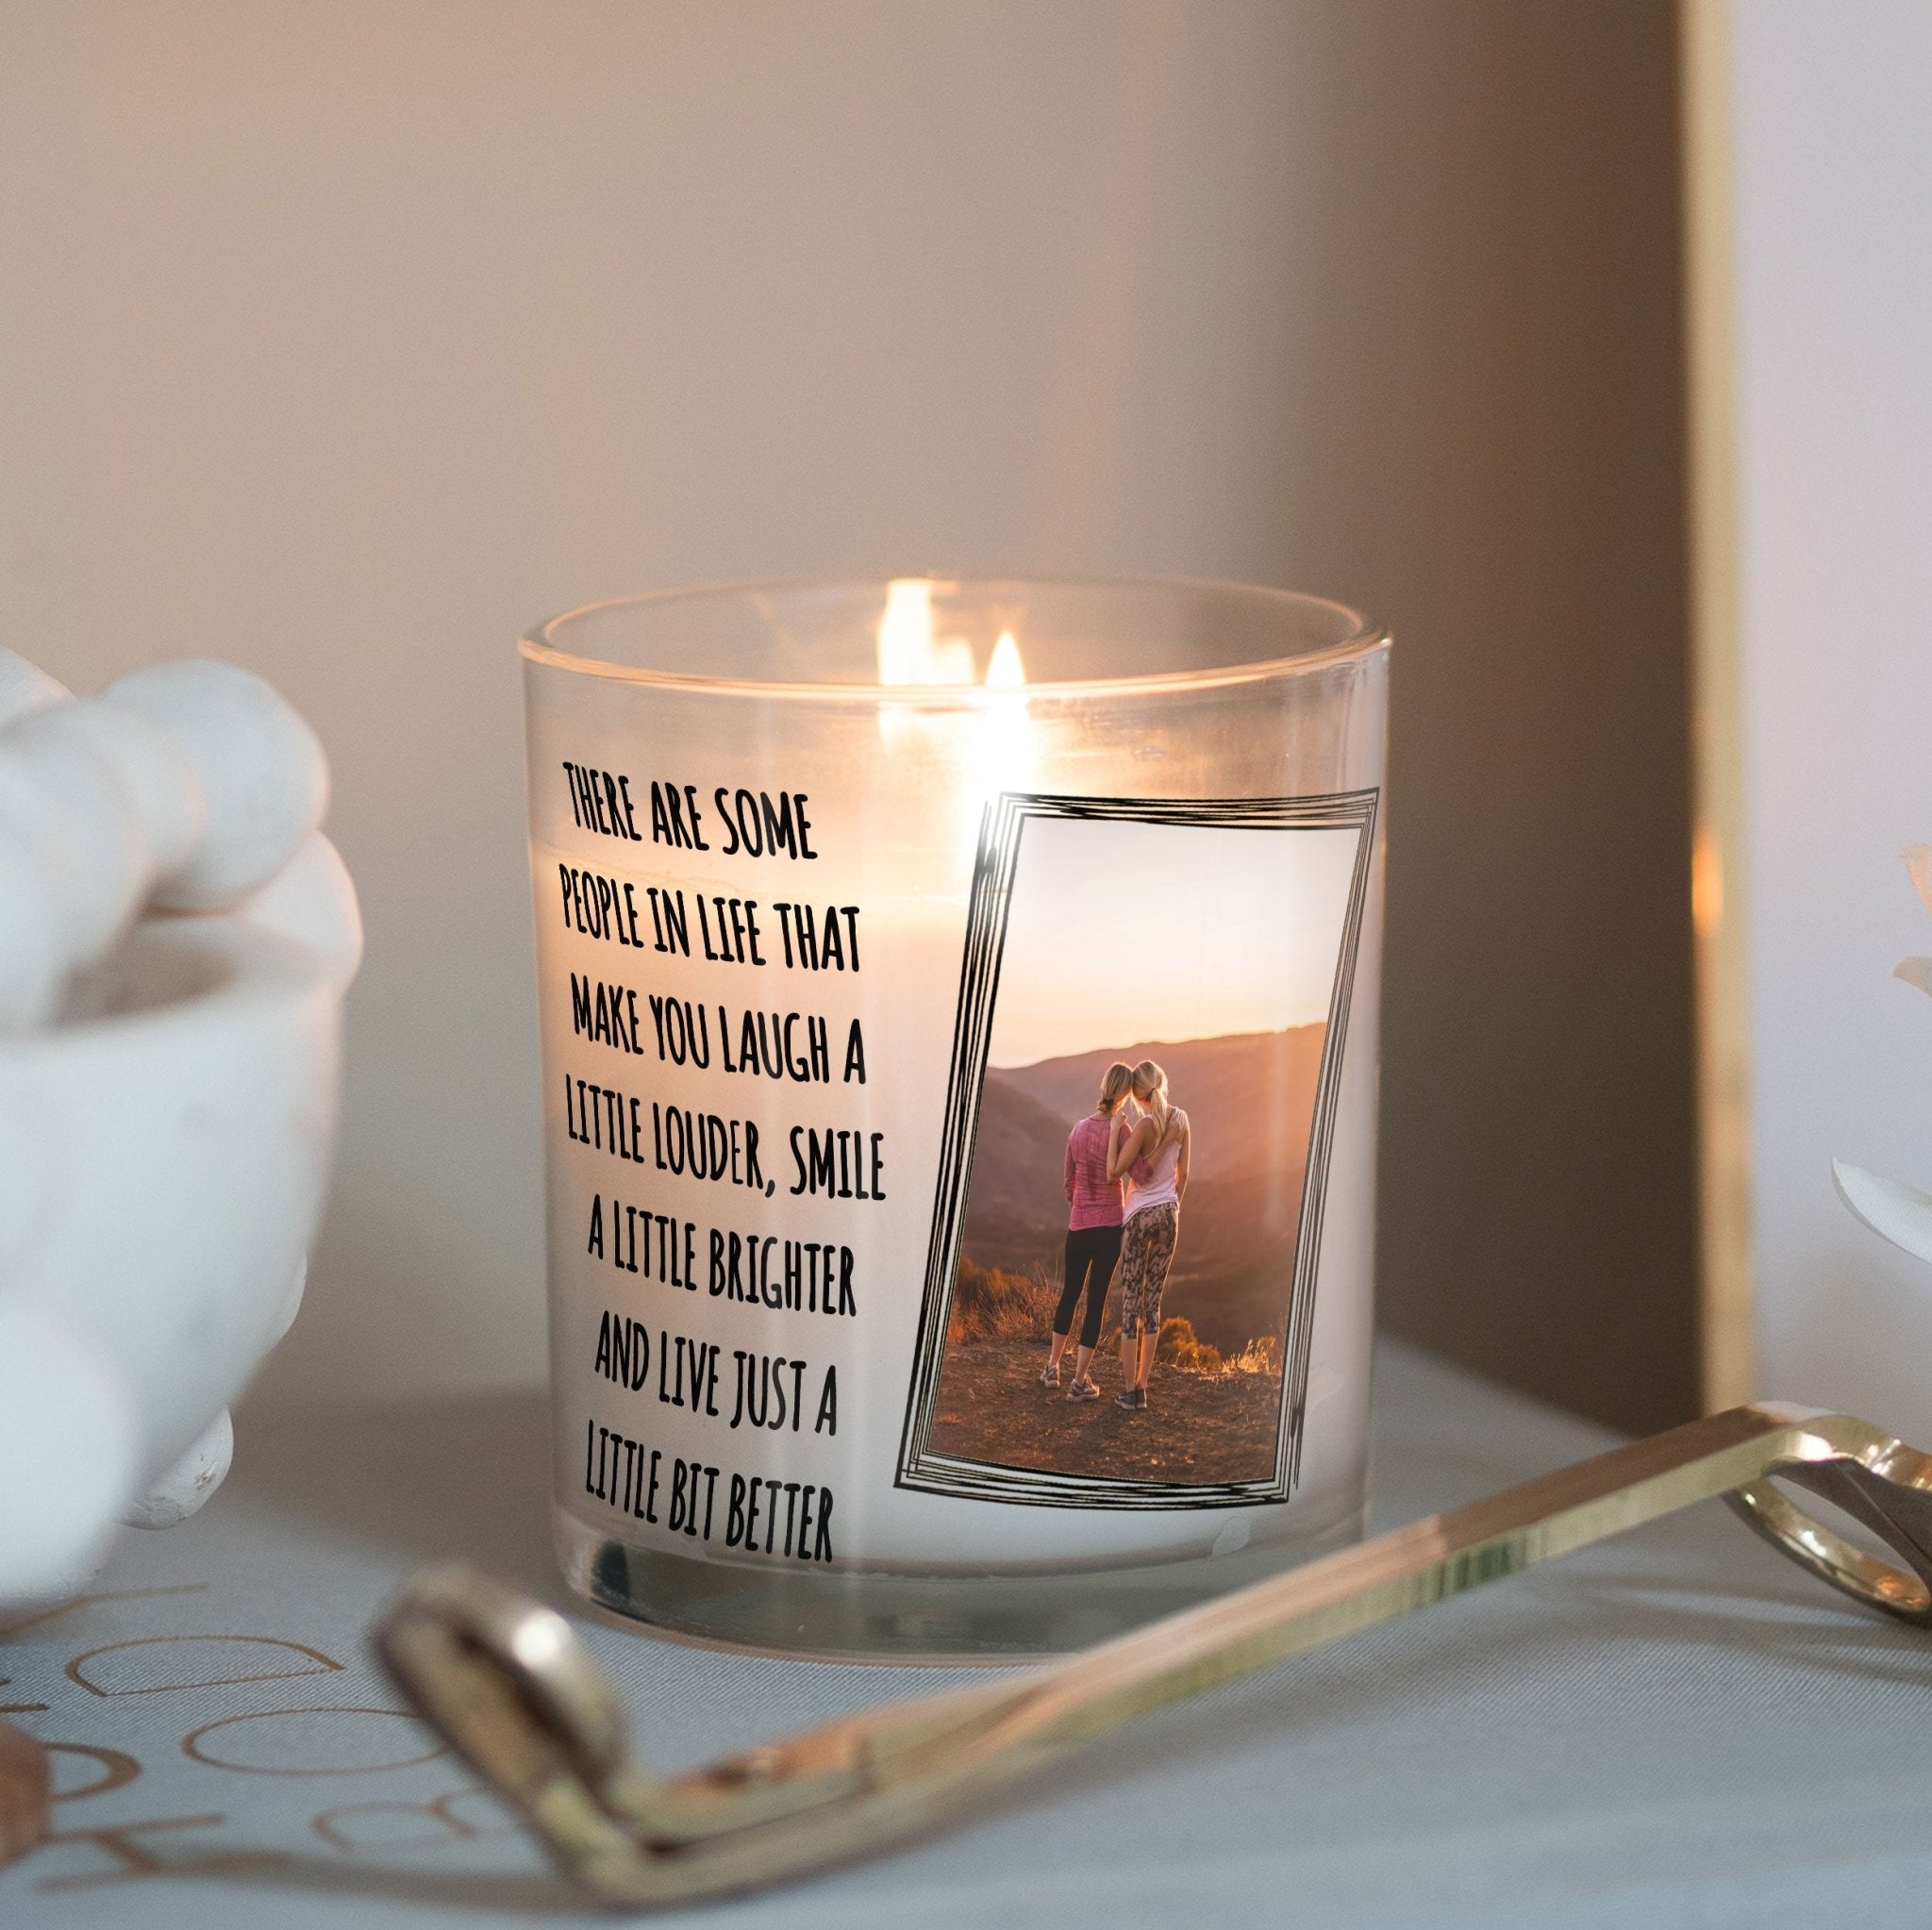 Best Friend Personalised Custom Photo Candle Holder | Friendship Gift Ideas | Custom Texts/Quotes Votive Glass with Picture | Decor Present Candleholder - Unique Prints